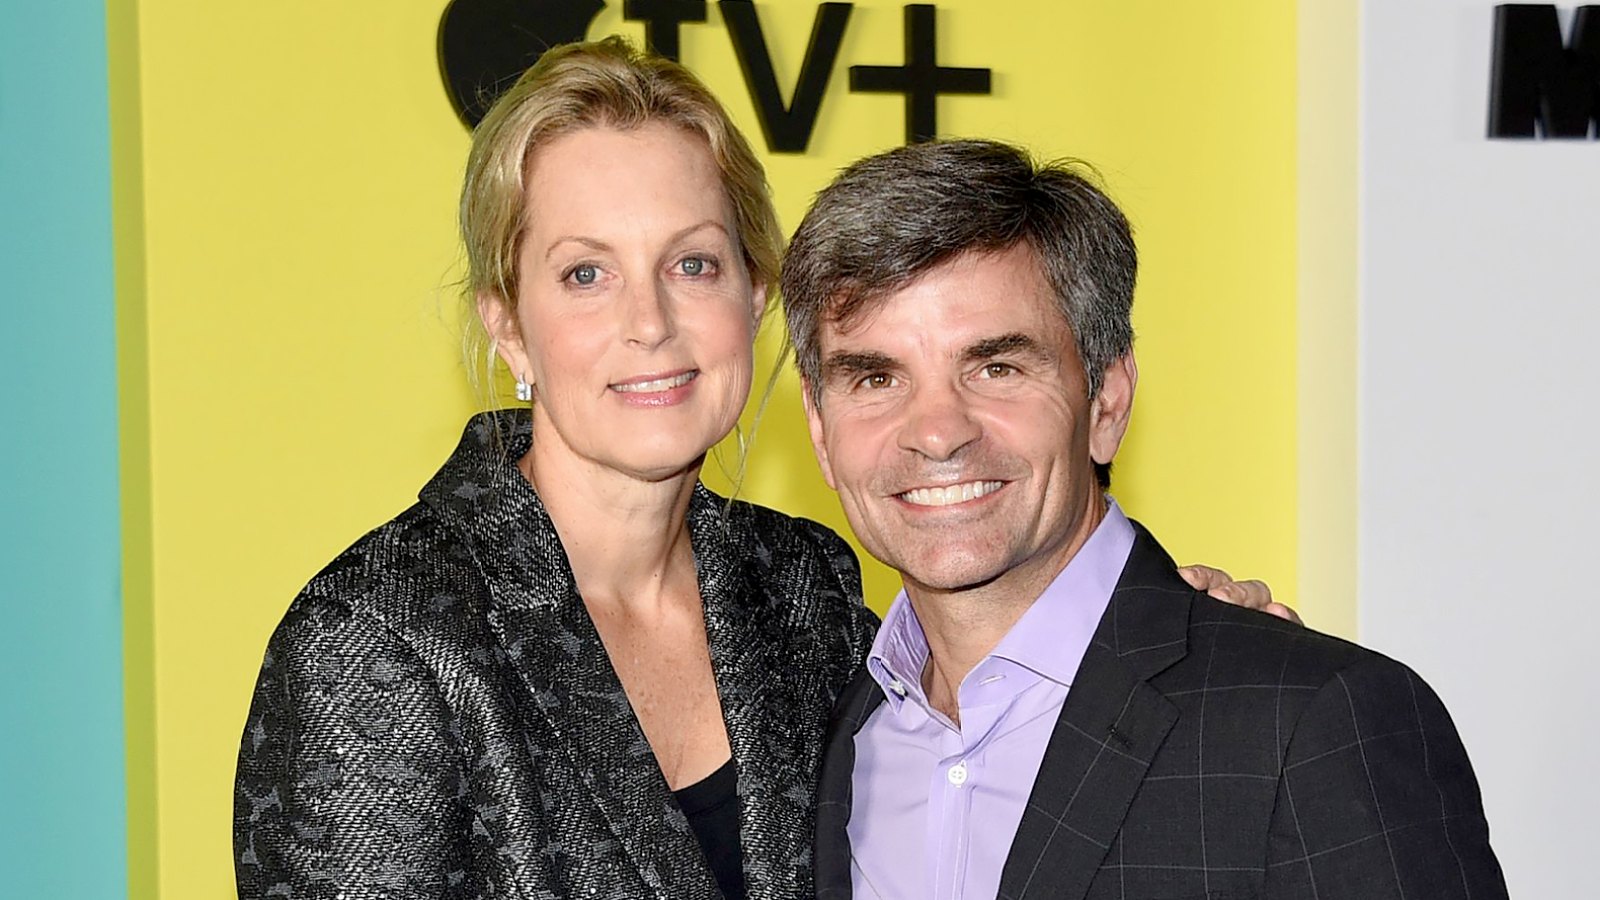 Ali Wentworth and George Stephanopoulos downplayed first date